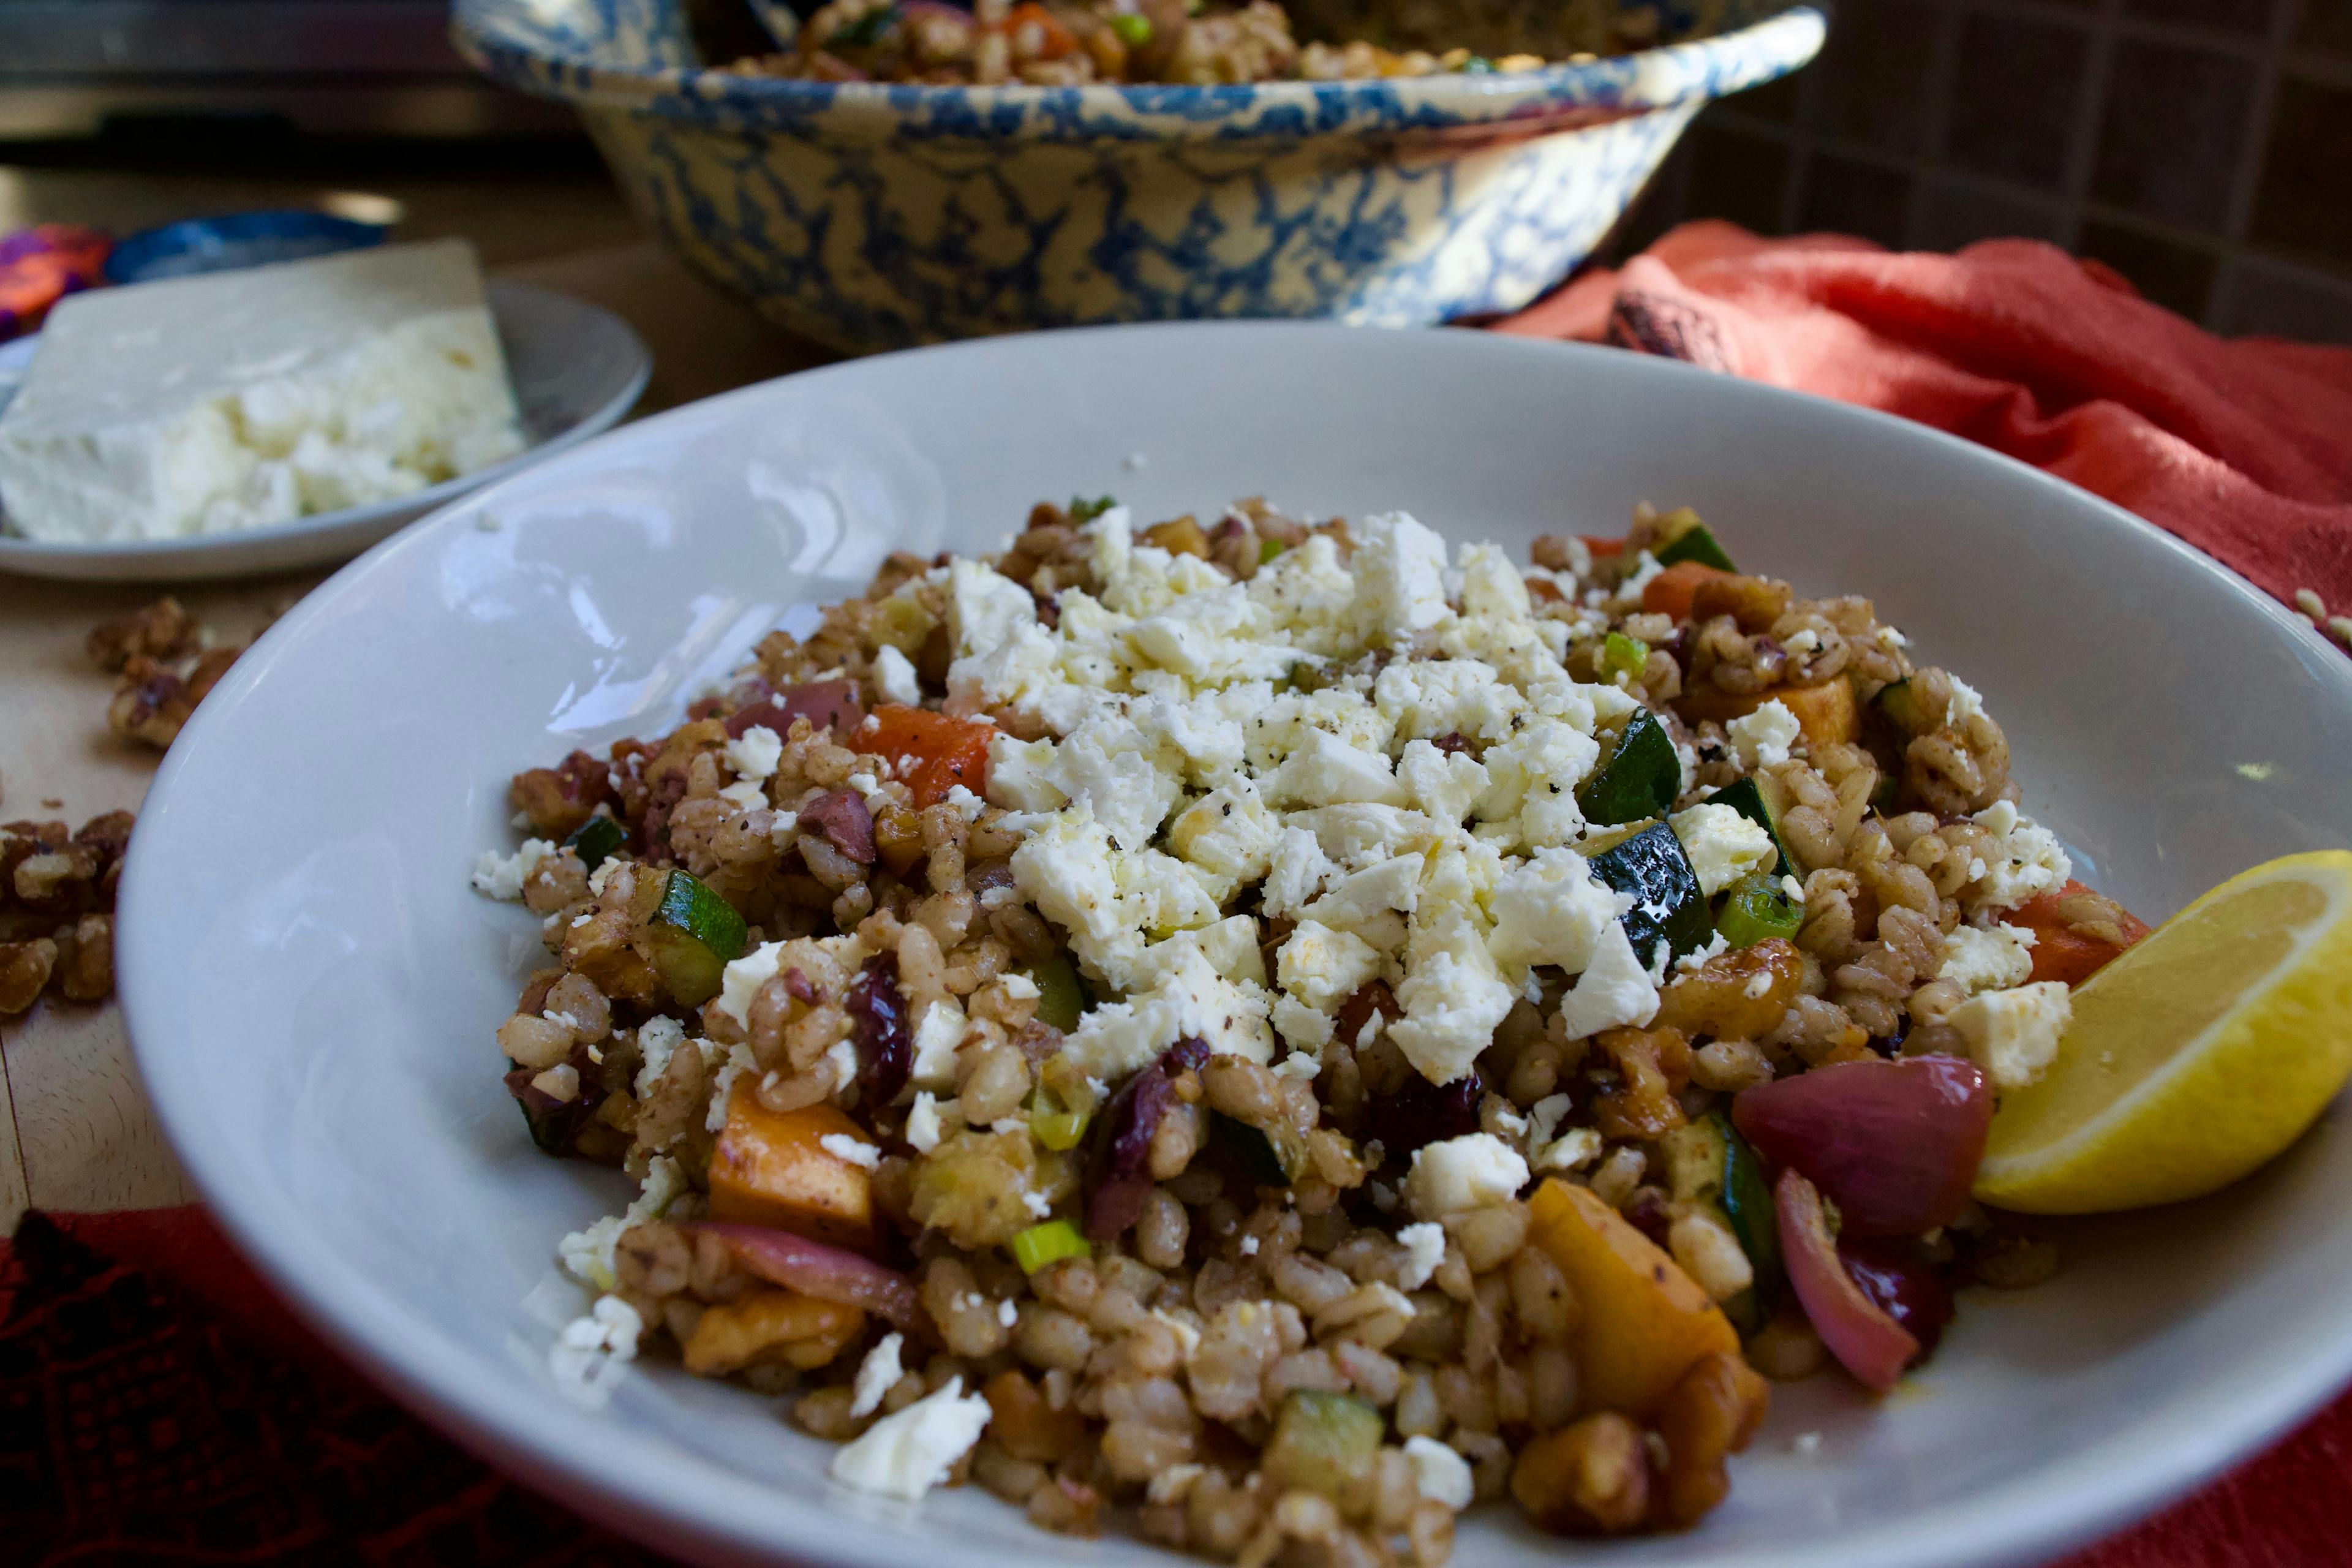 A plate of barley salad with crumbled feta and a lemon wedge on the side.